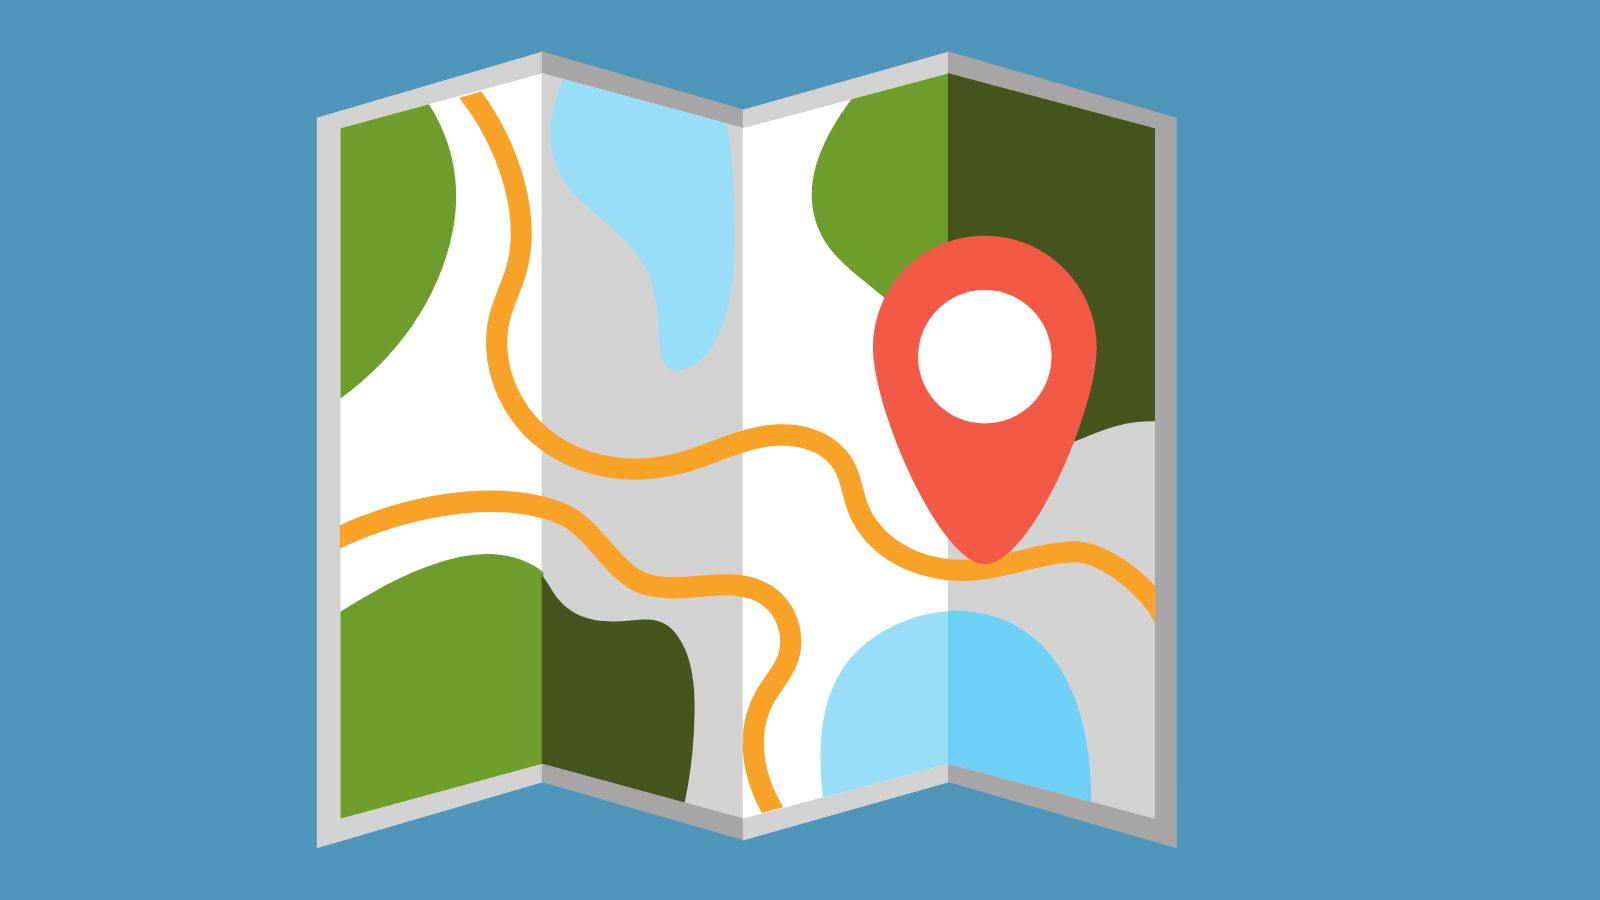 An abstract map